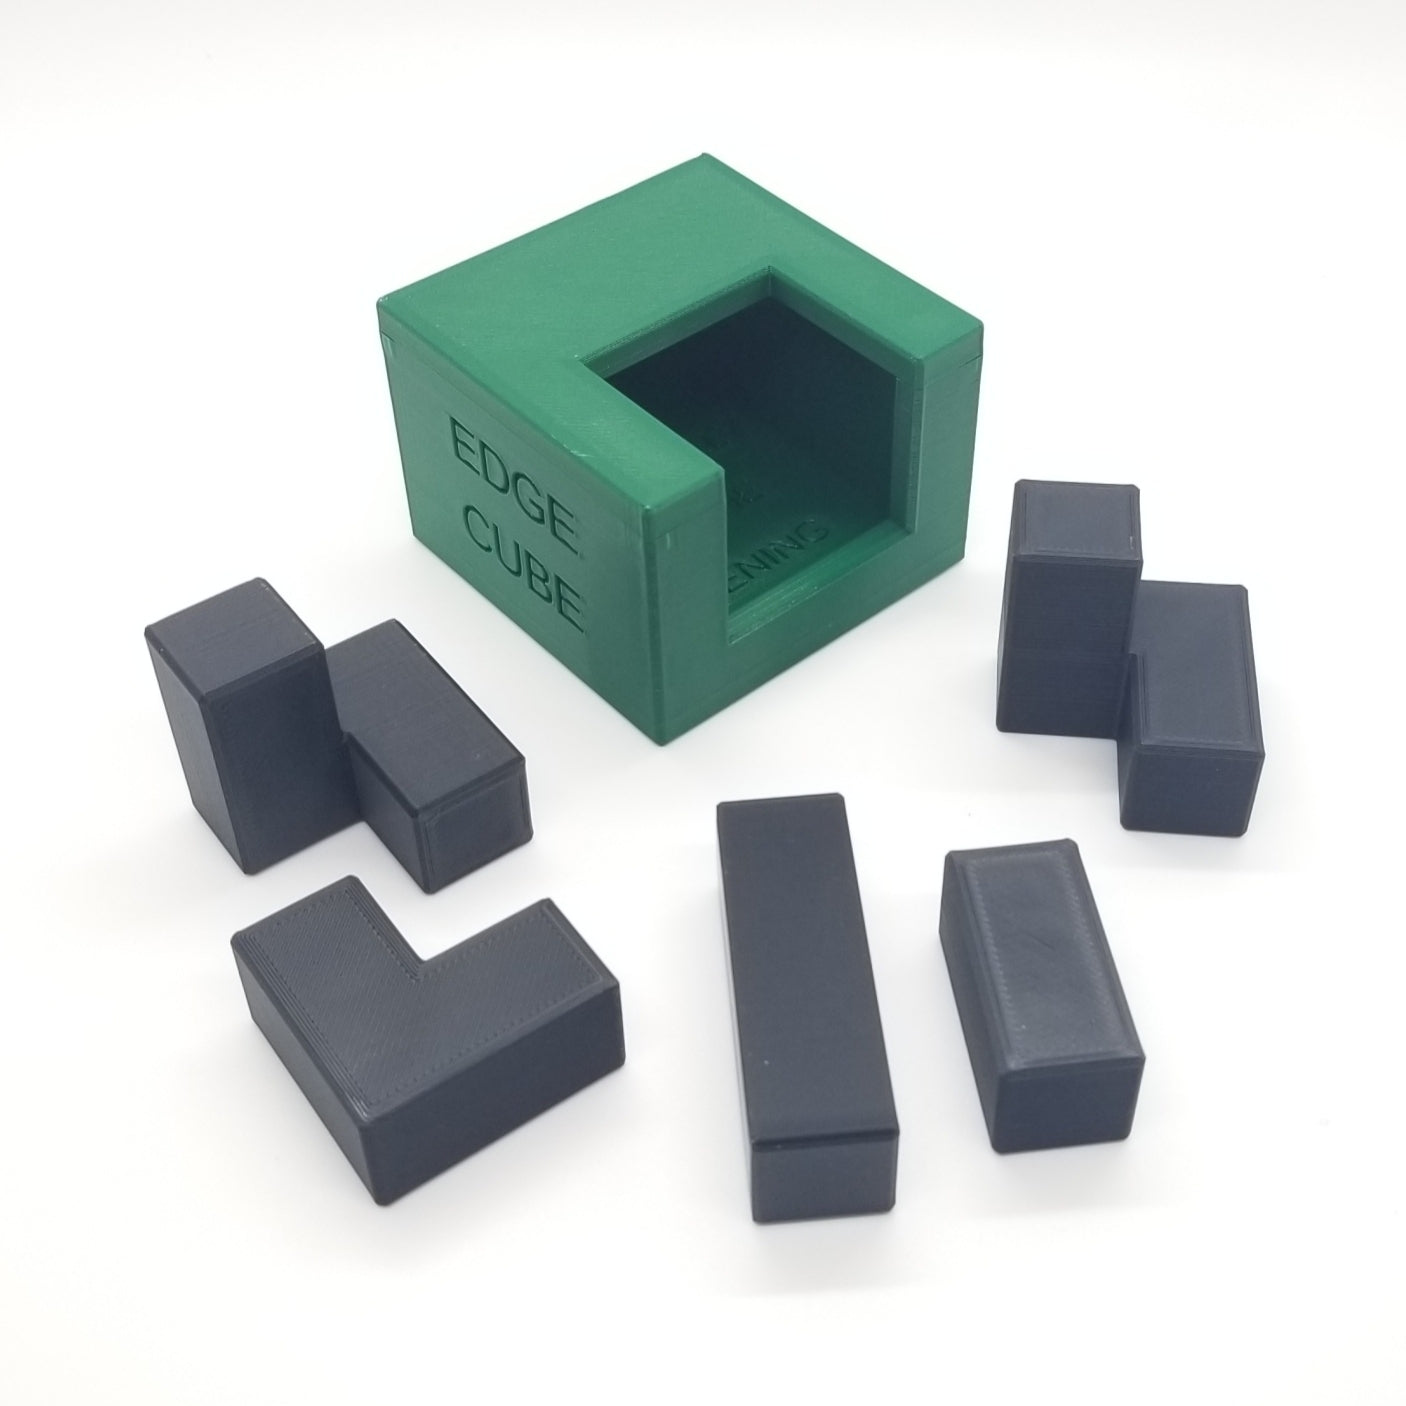 Download 3D Printable STL Files for 4 Packing Puzzles - Apparent Cube Puzzles - ARCparent Cubes